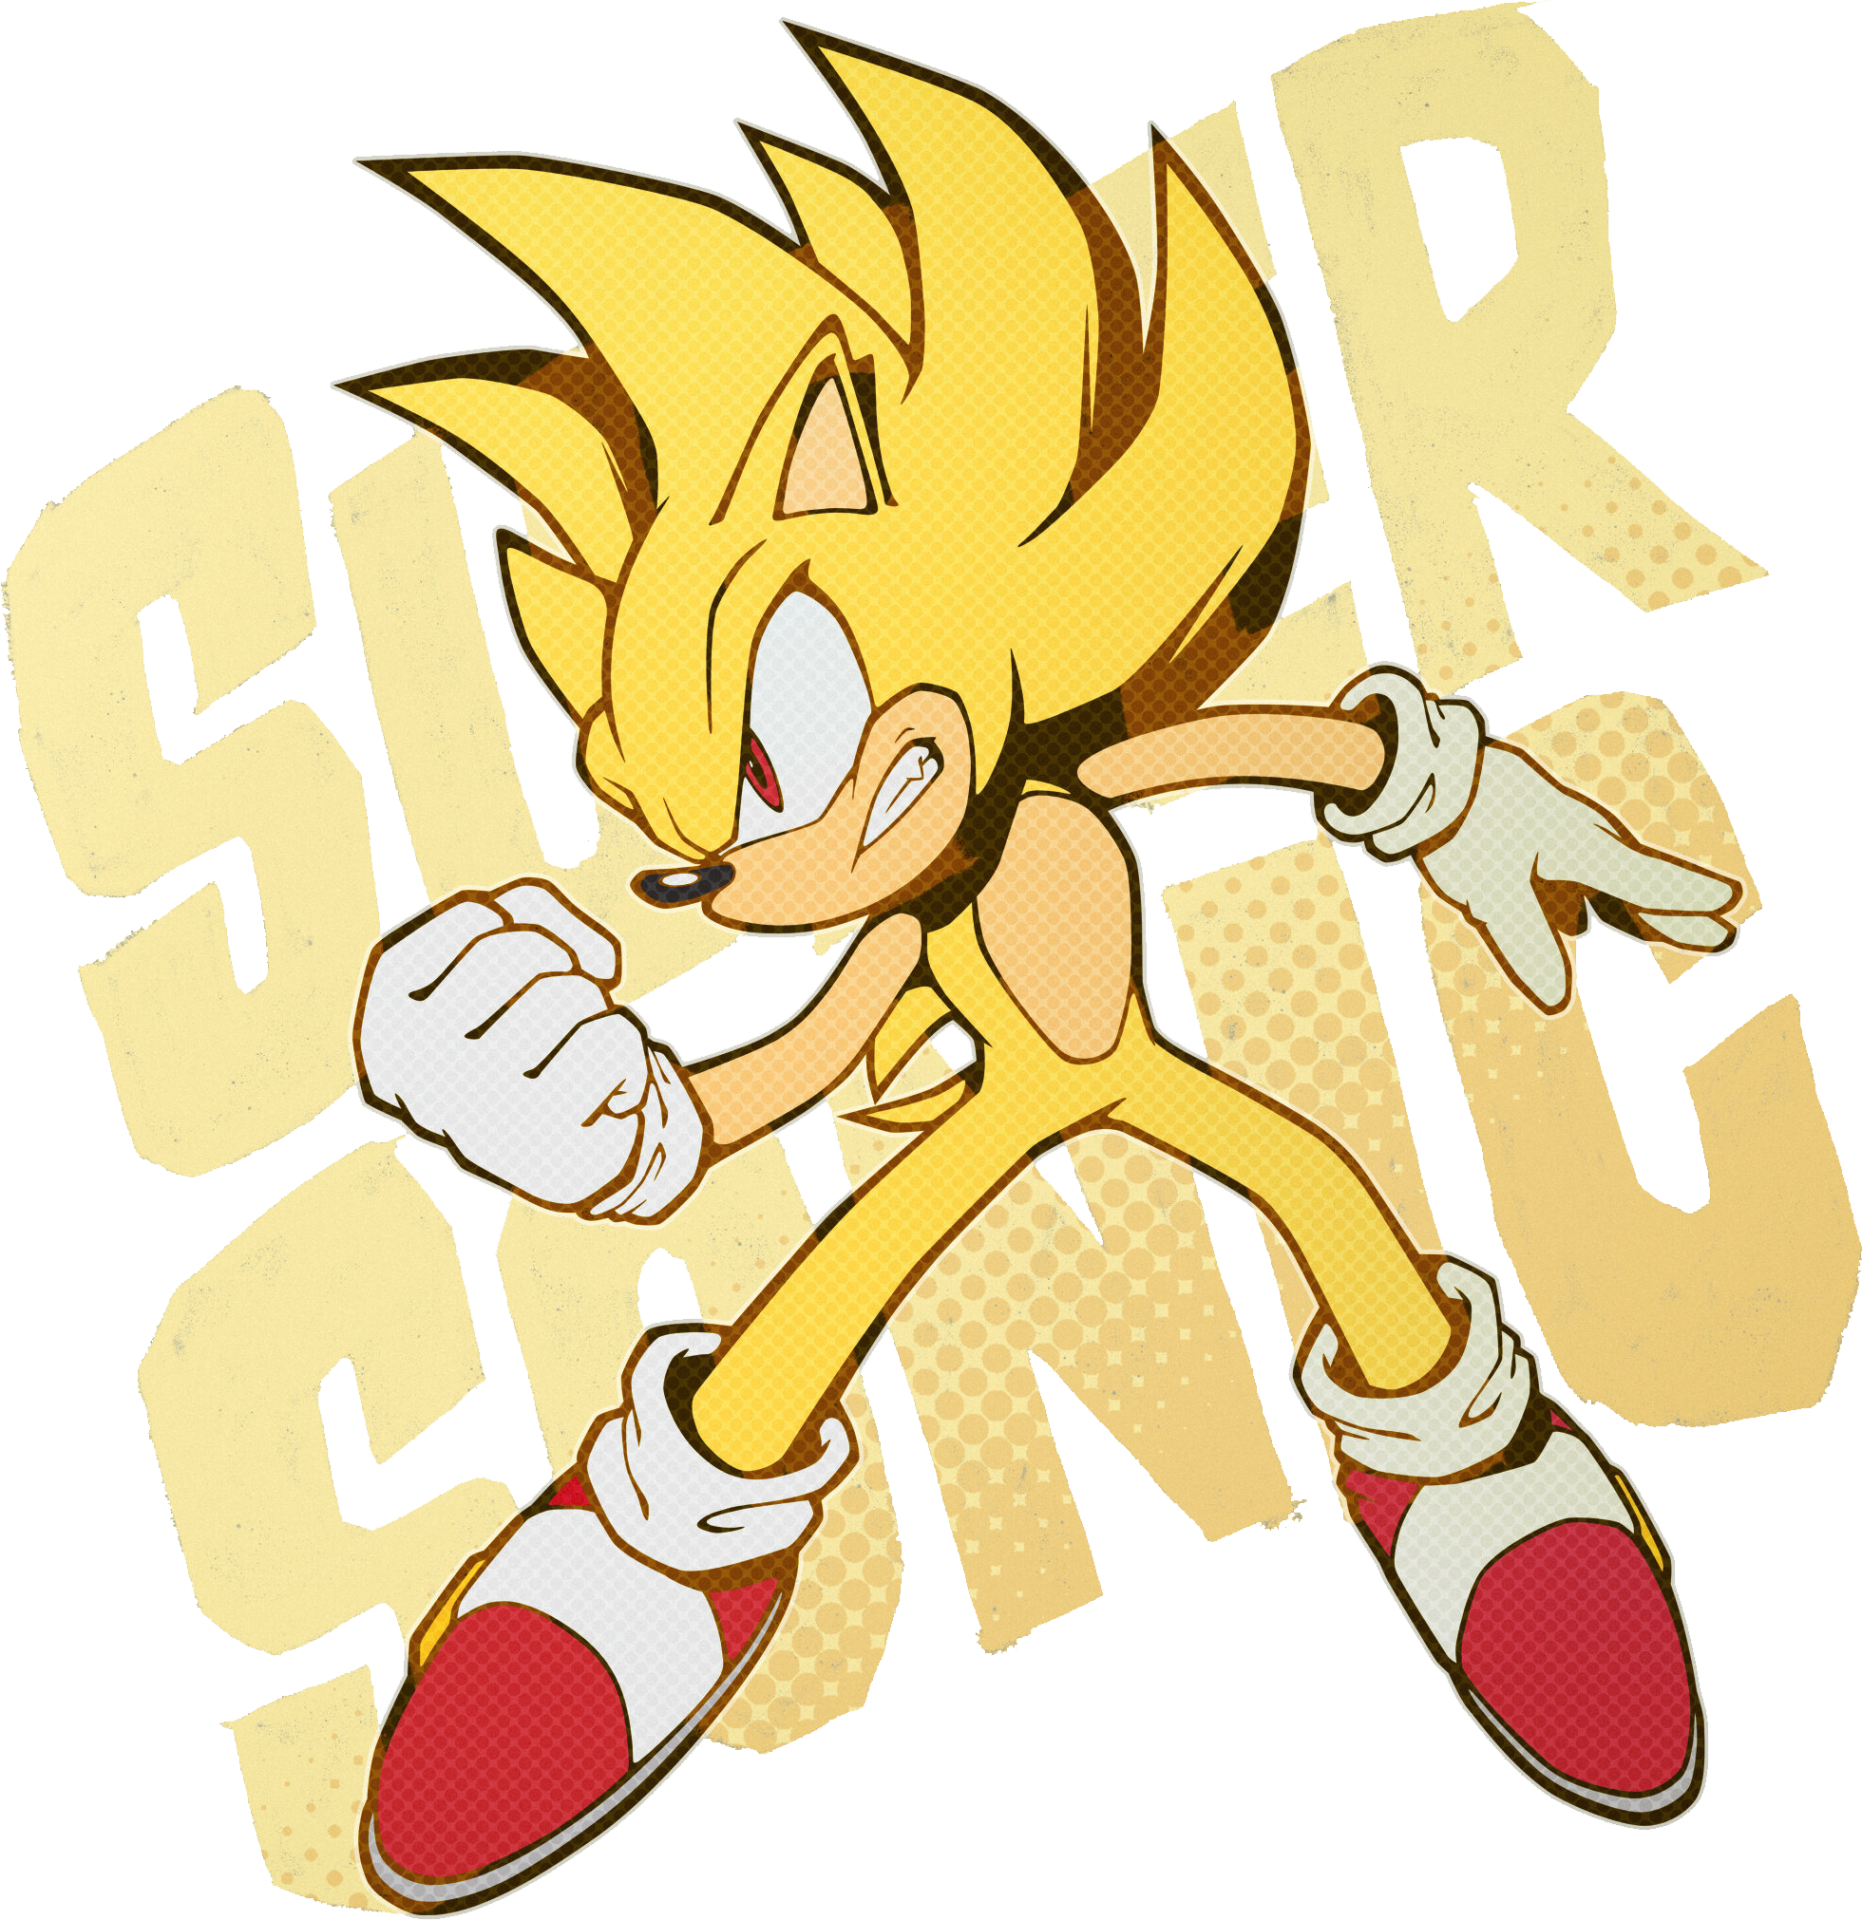 Sonic_Channel_2023_01_wallpaper.png